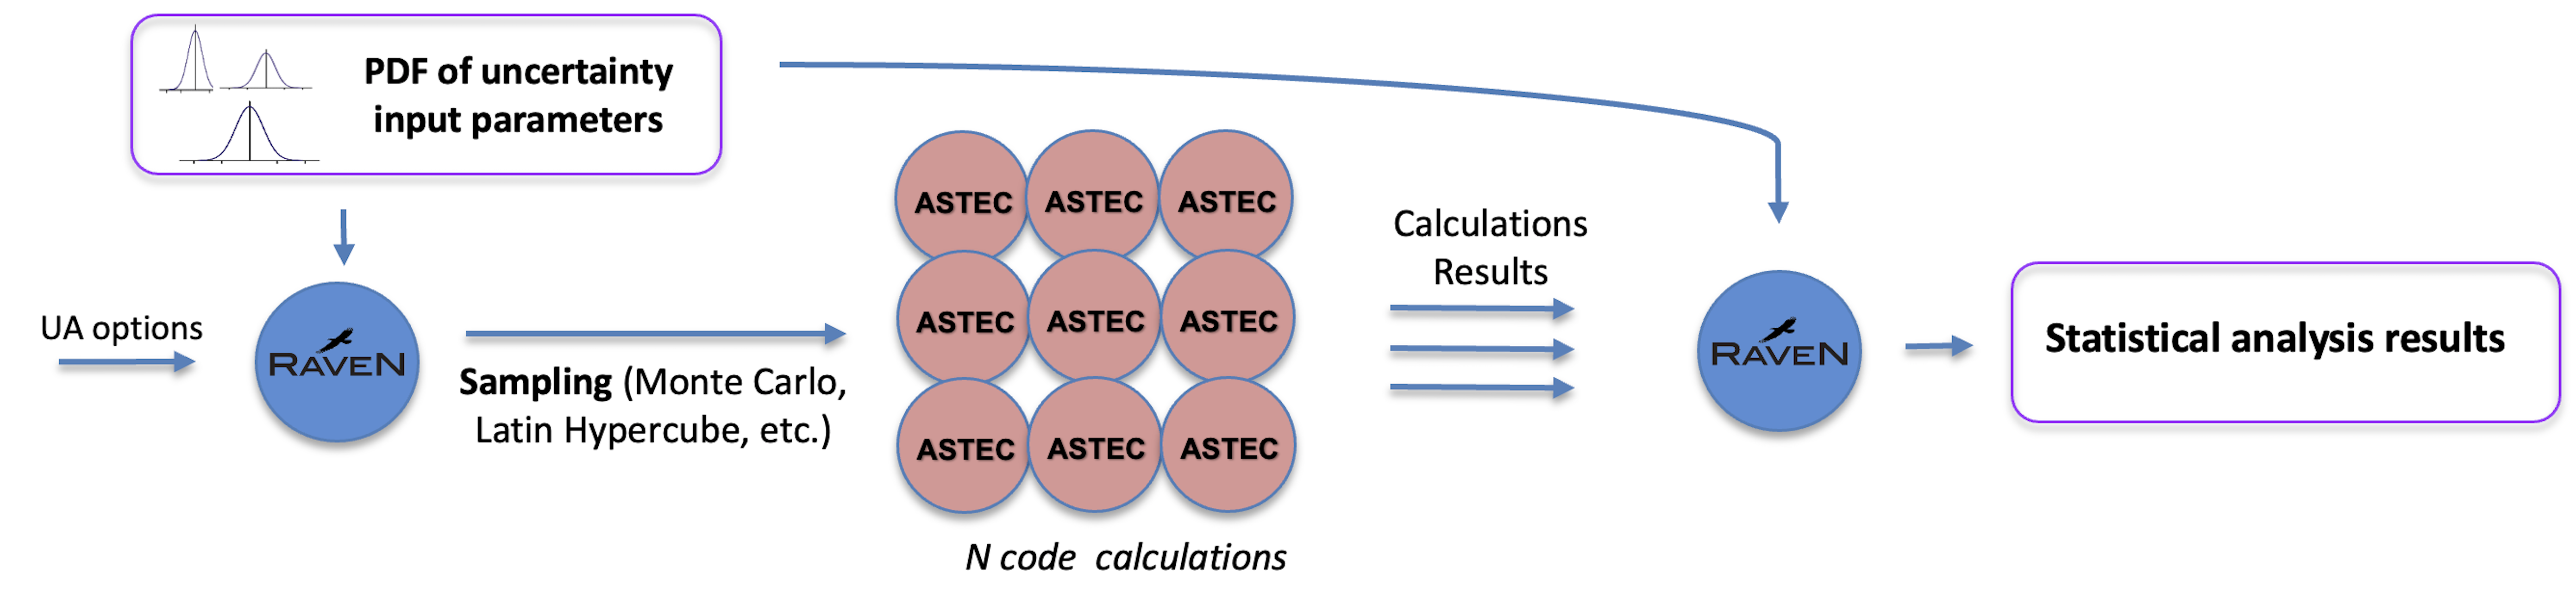 ASTEC/RAVEN coupling workflow for uncertainty analyses